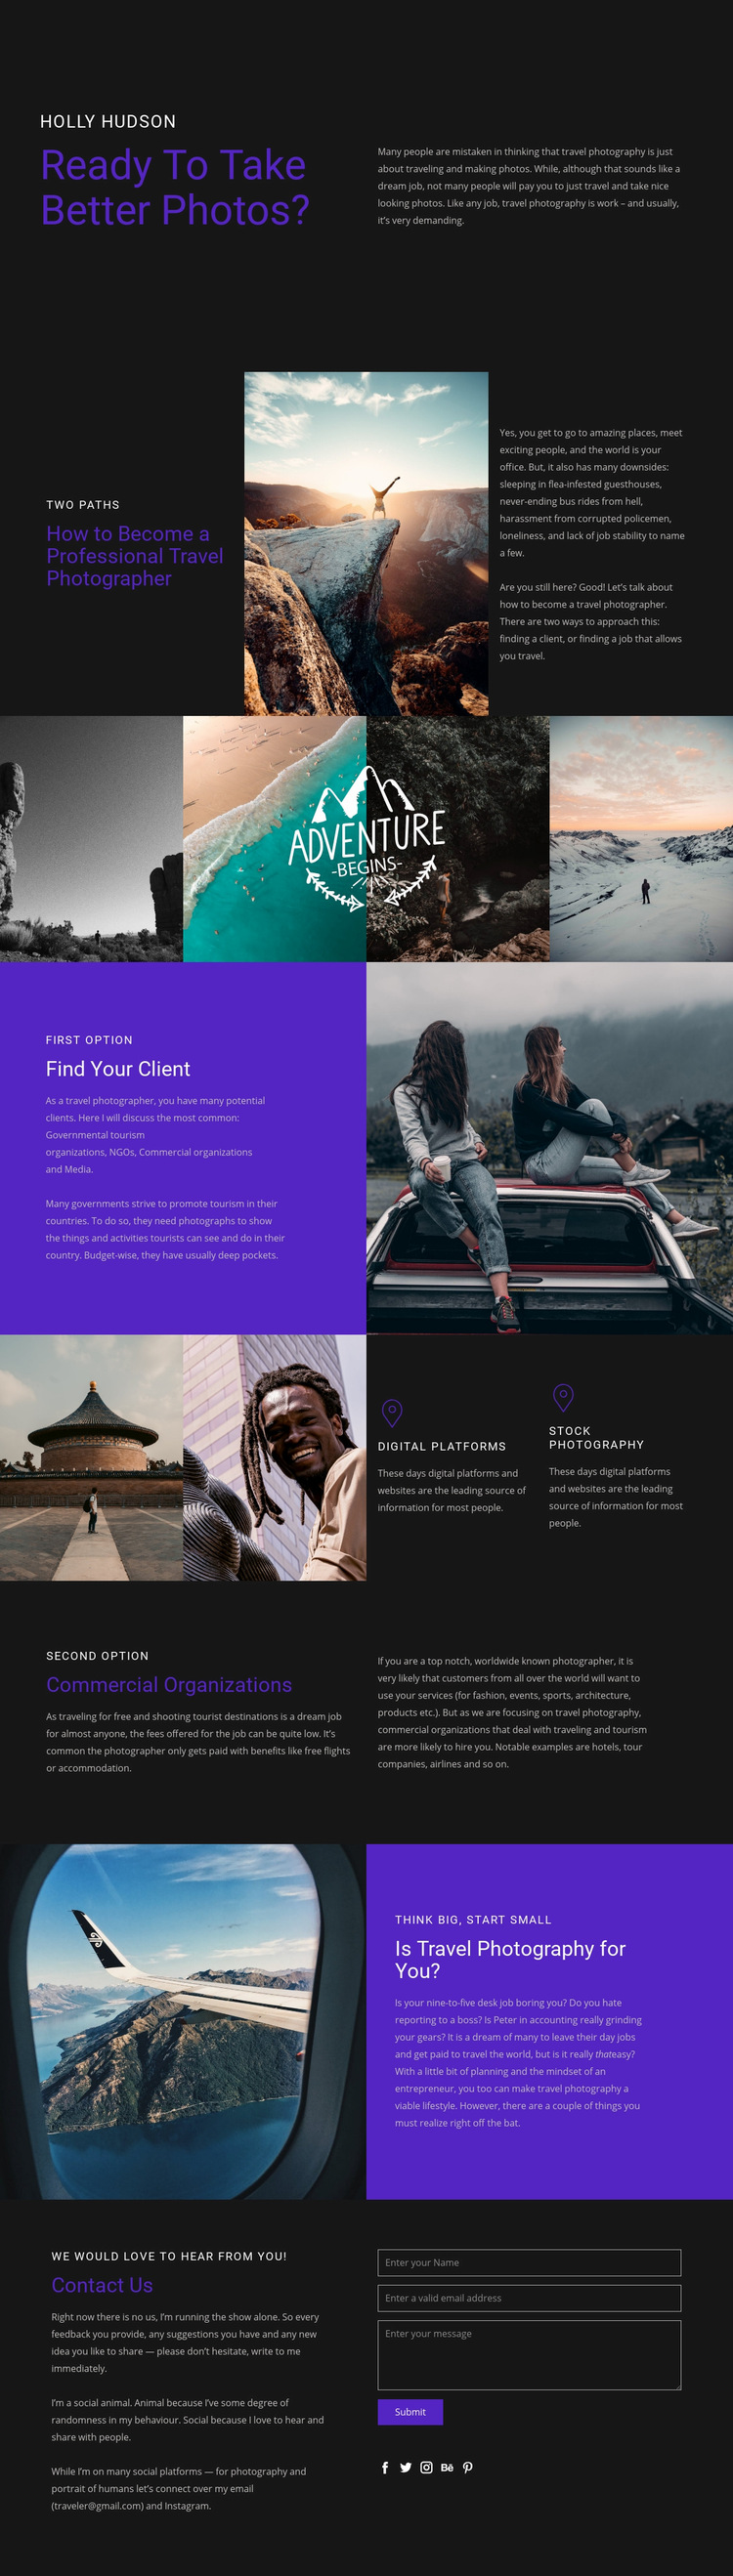 Travel and photography Web Page Design